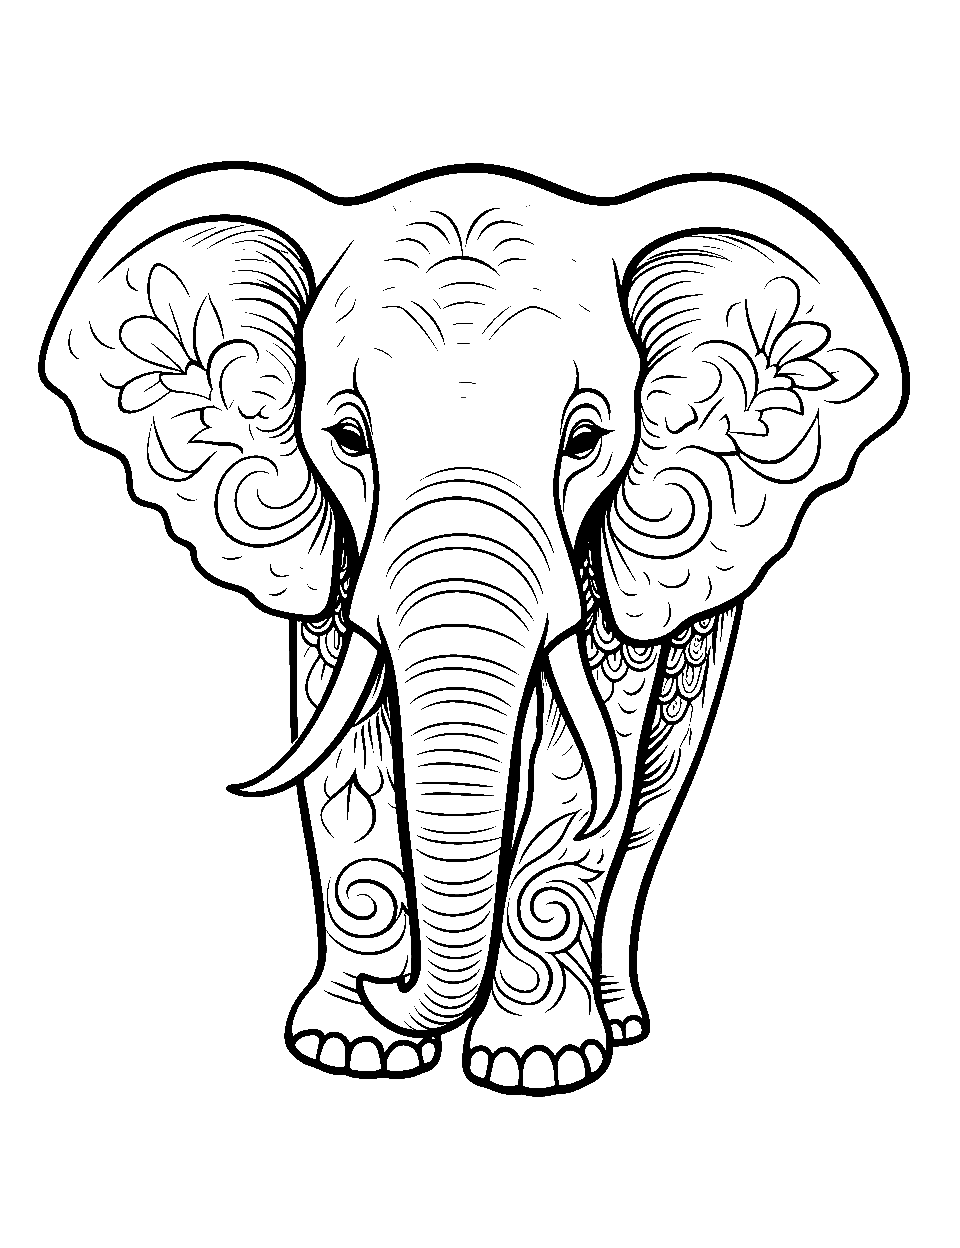 Patterns of the Wild Coloring Page - An elephant covered in beautiful natural patterns.